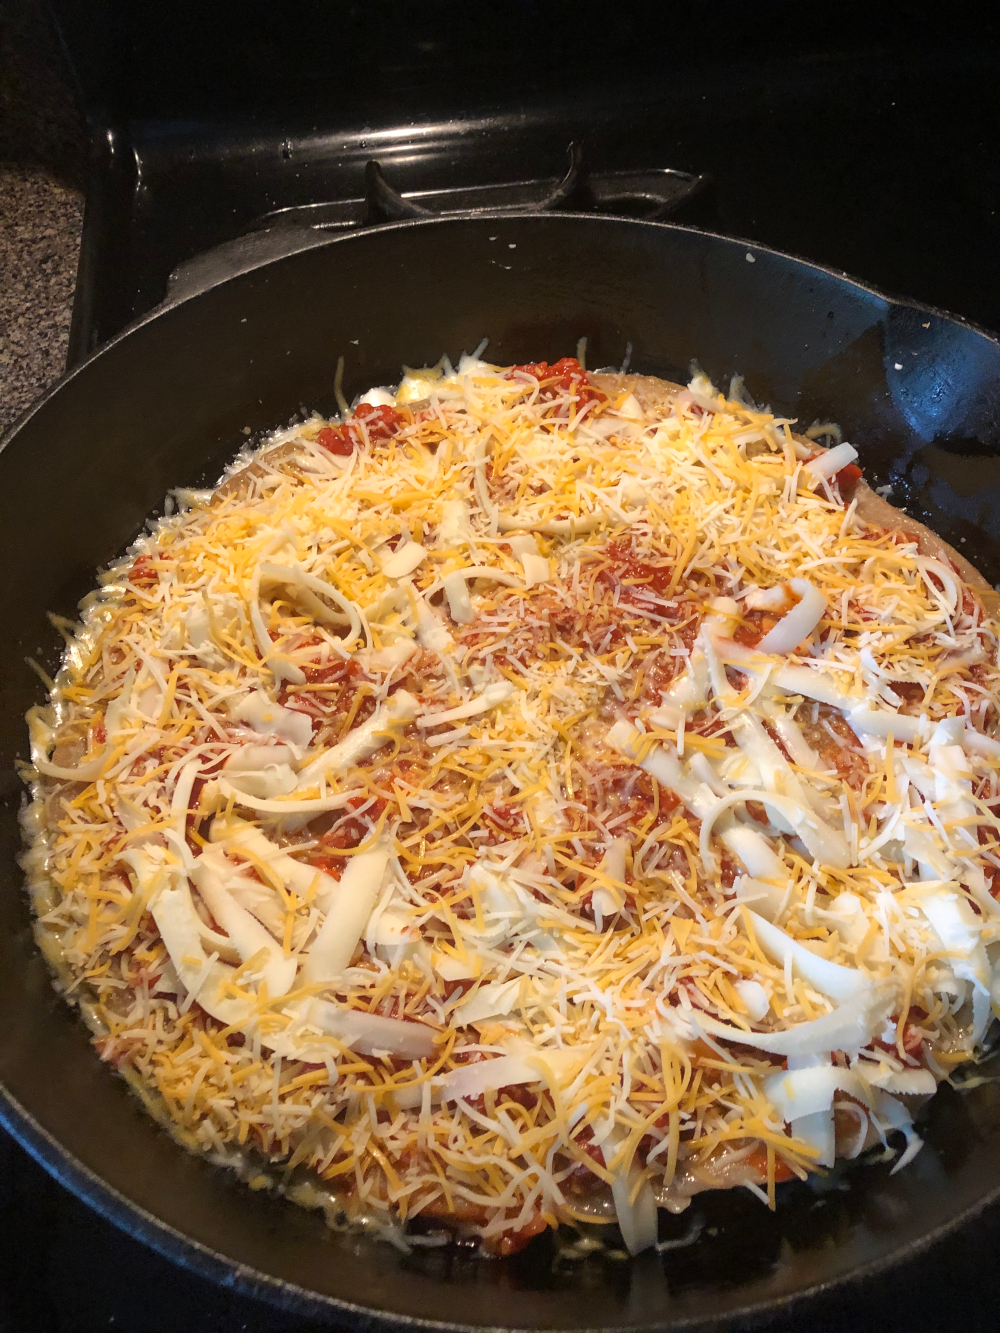 Step 7, Add Toppings - Cheese